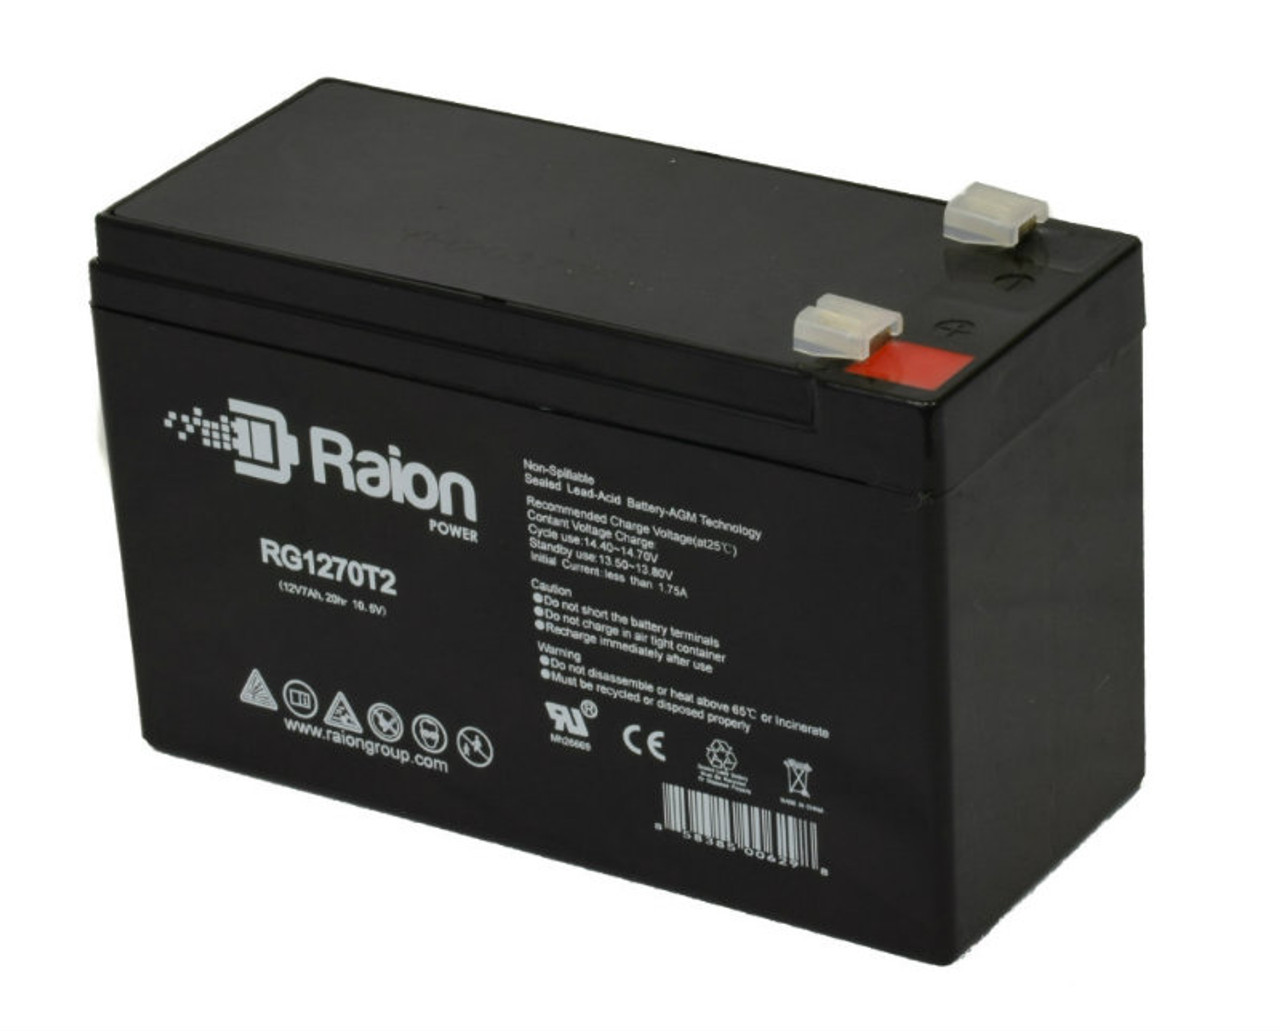 Raion Power Replacement 12V 7Ah RG1270T1 Fire Alarm Battery for Altronix SMP7PMP8CB